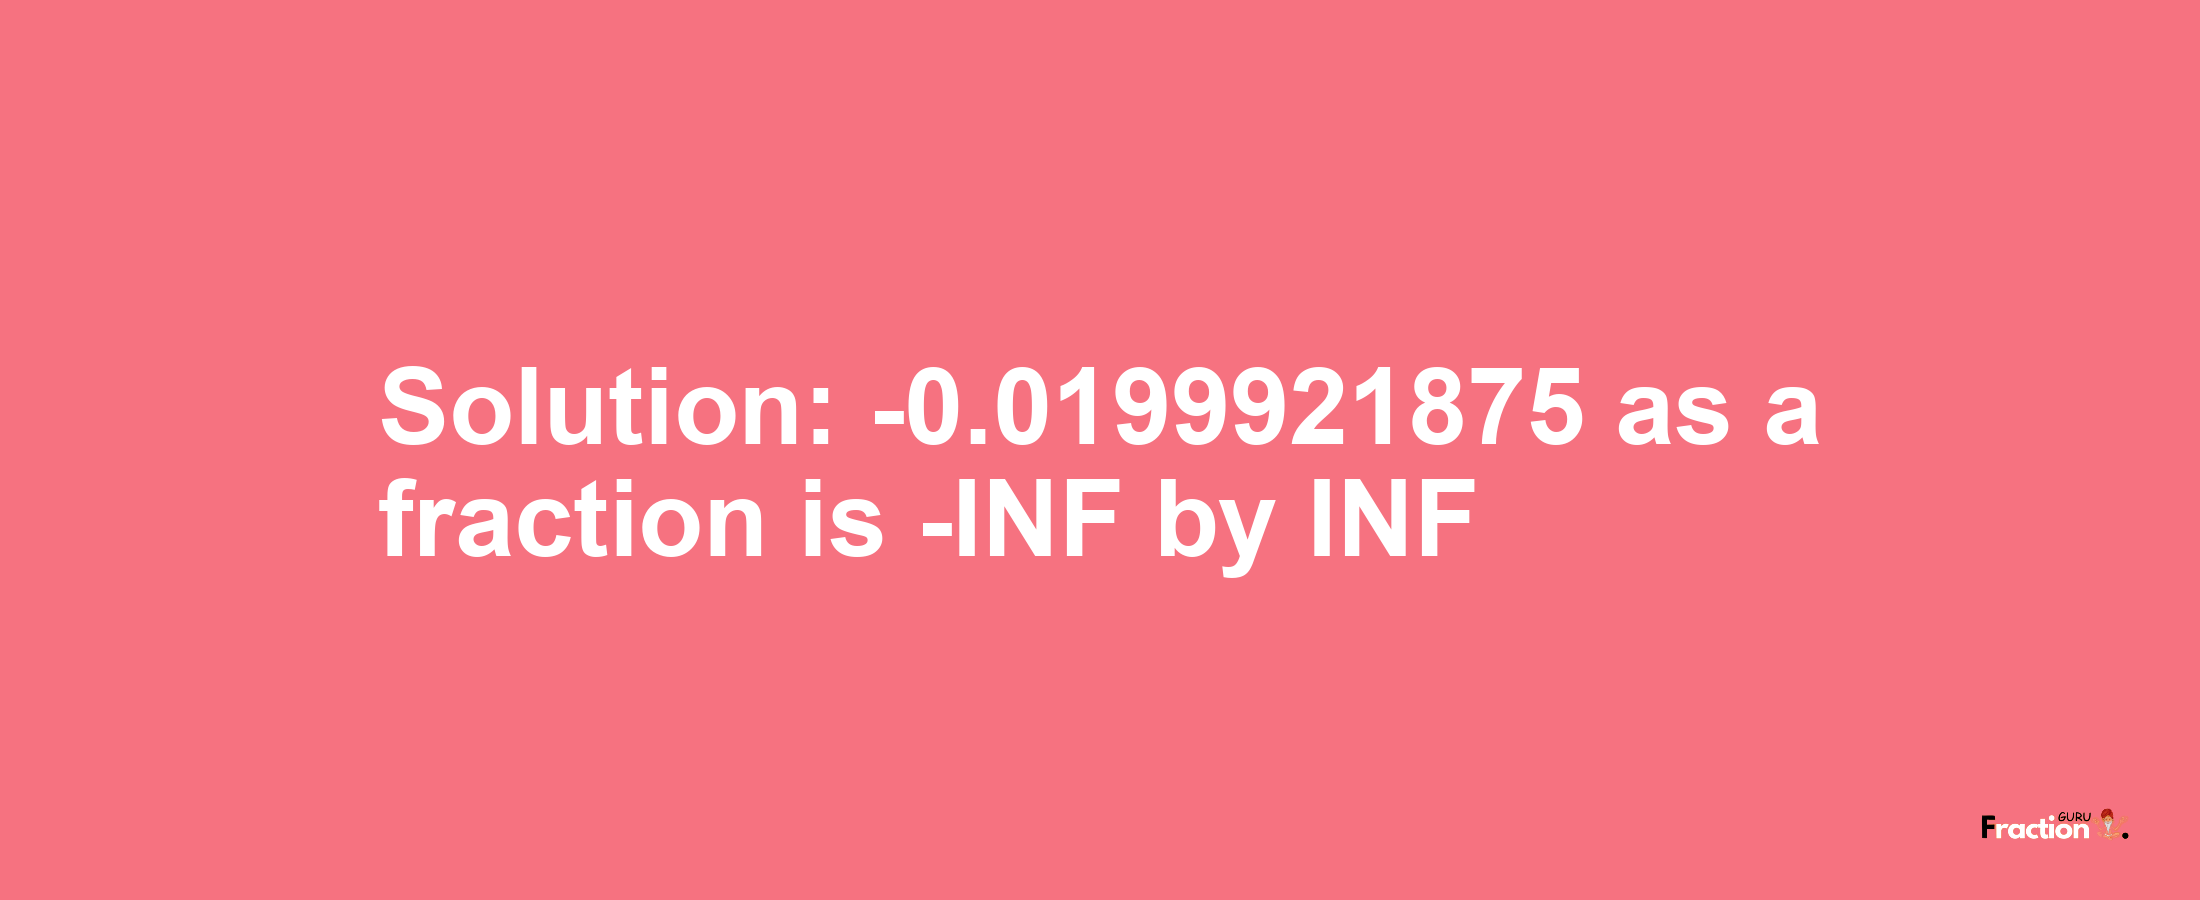 Solution:-0.0199921875 as a fraction is -INF/INF